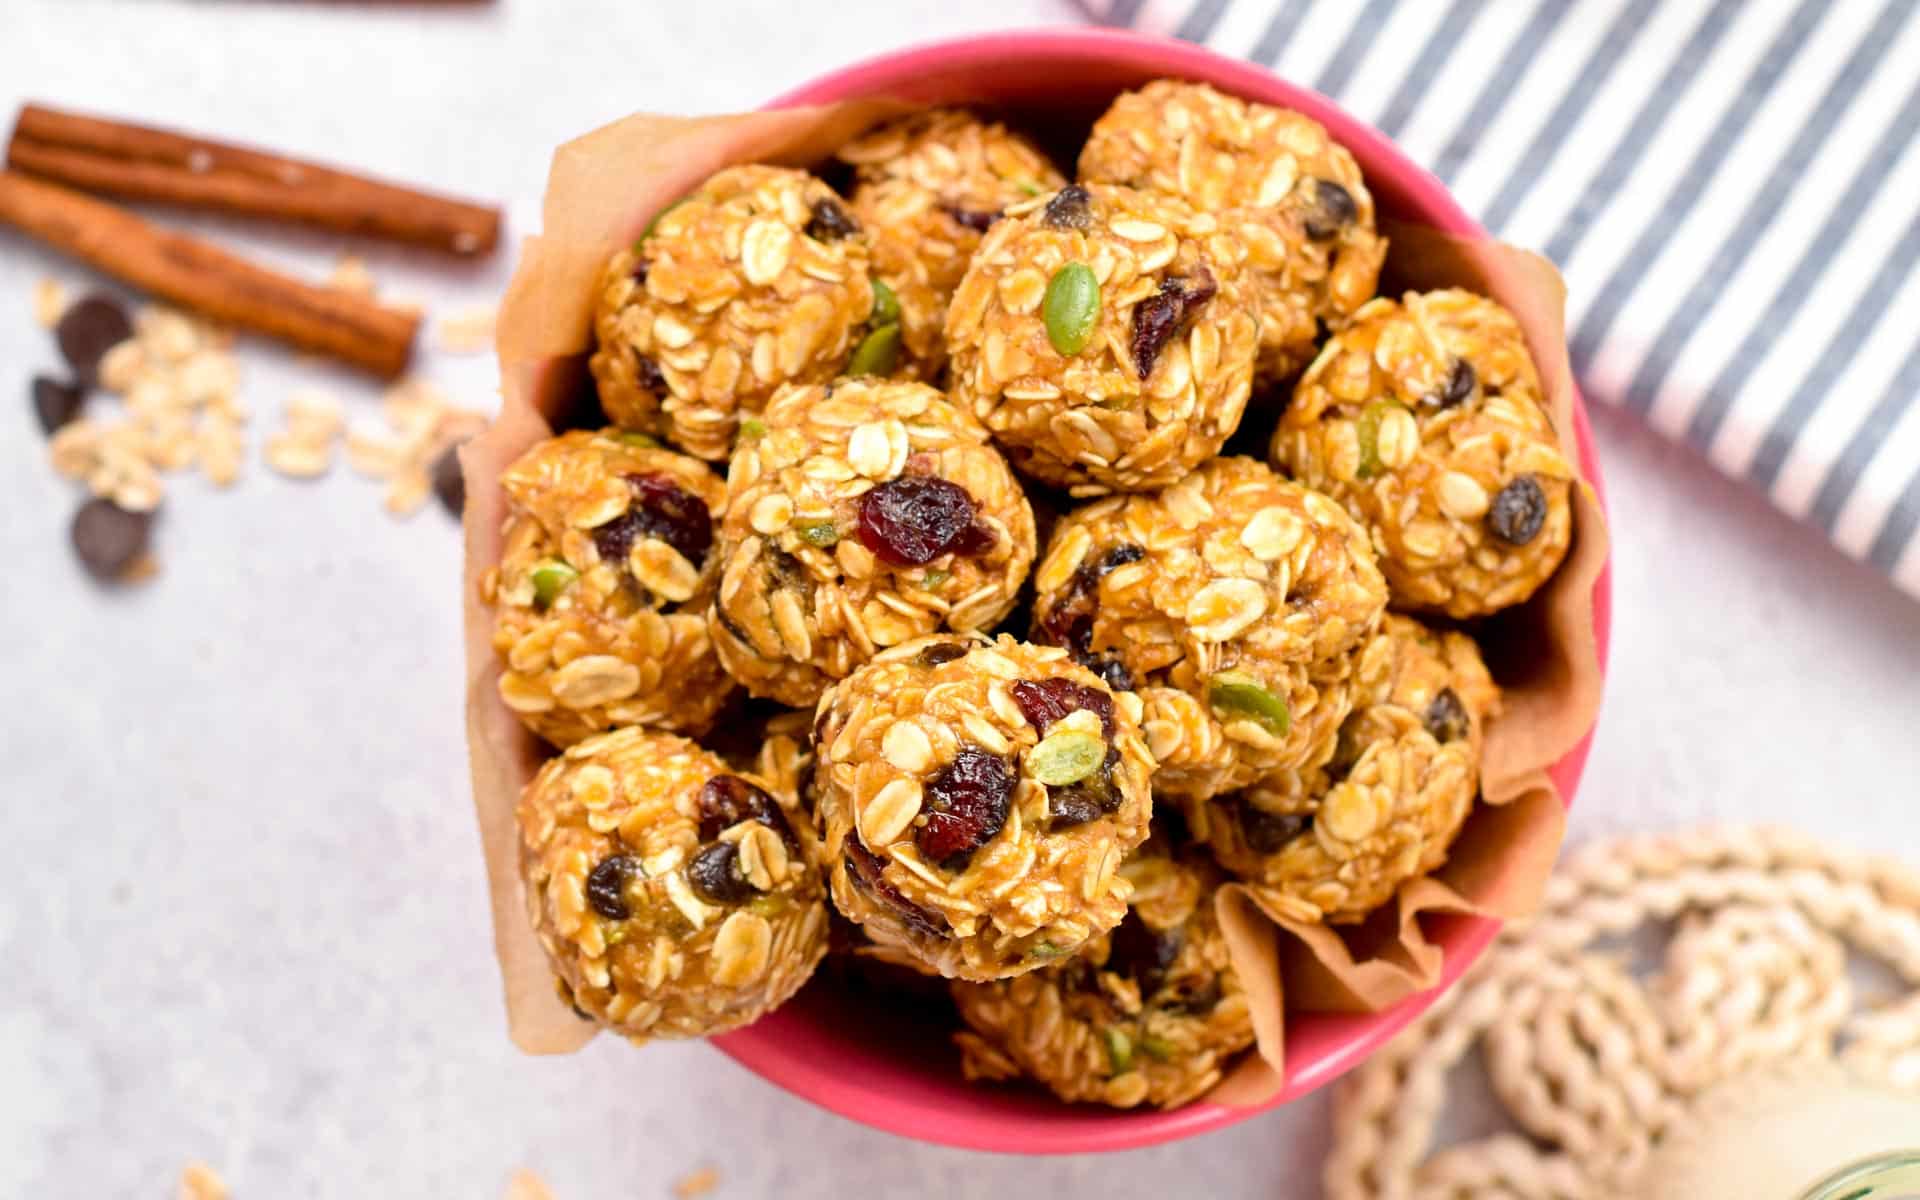 These Nut-Free Energy Balls are easy, healthy, and quick snacks to fix your sweet cravings and bring fiber and proteins to your day.